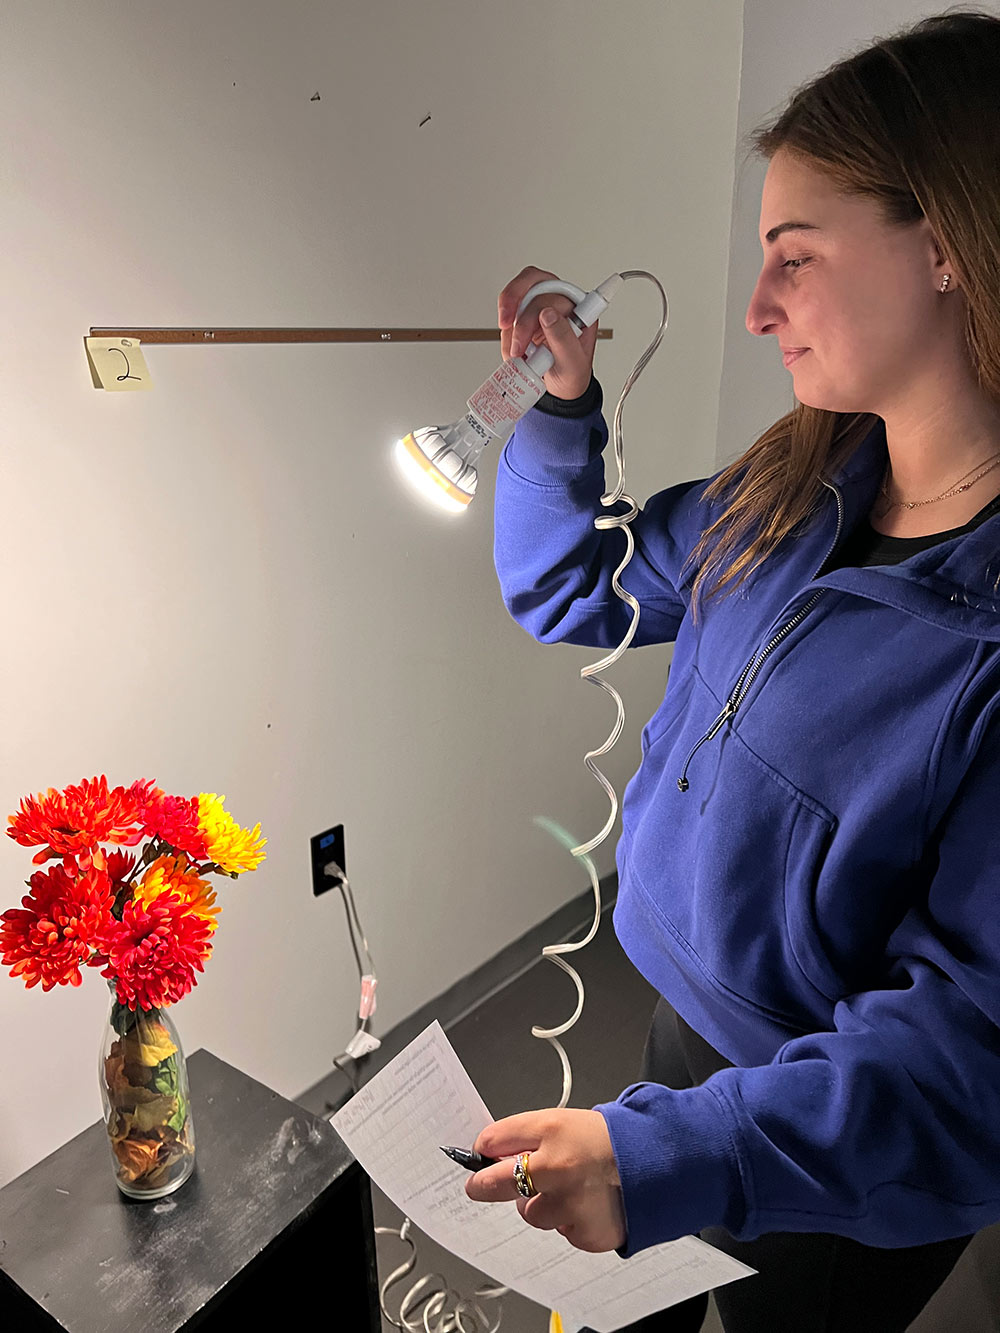 student shines light on flower on table in lighting lab